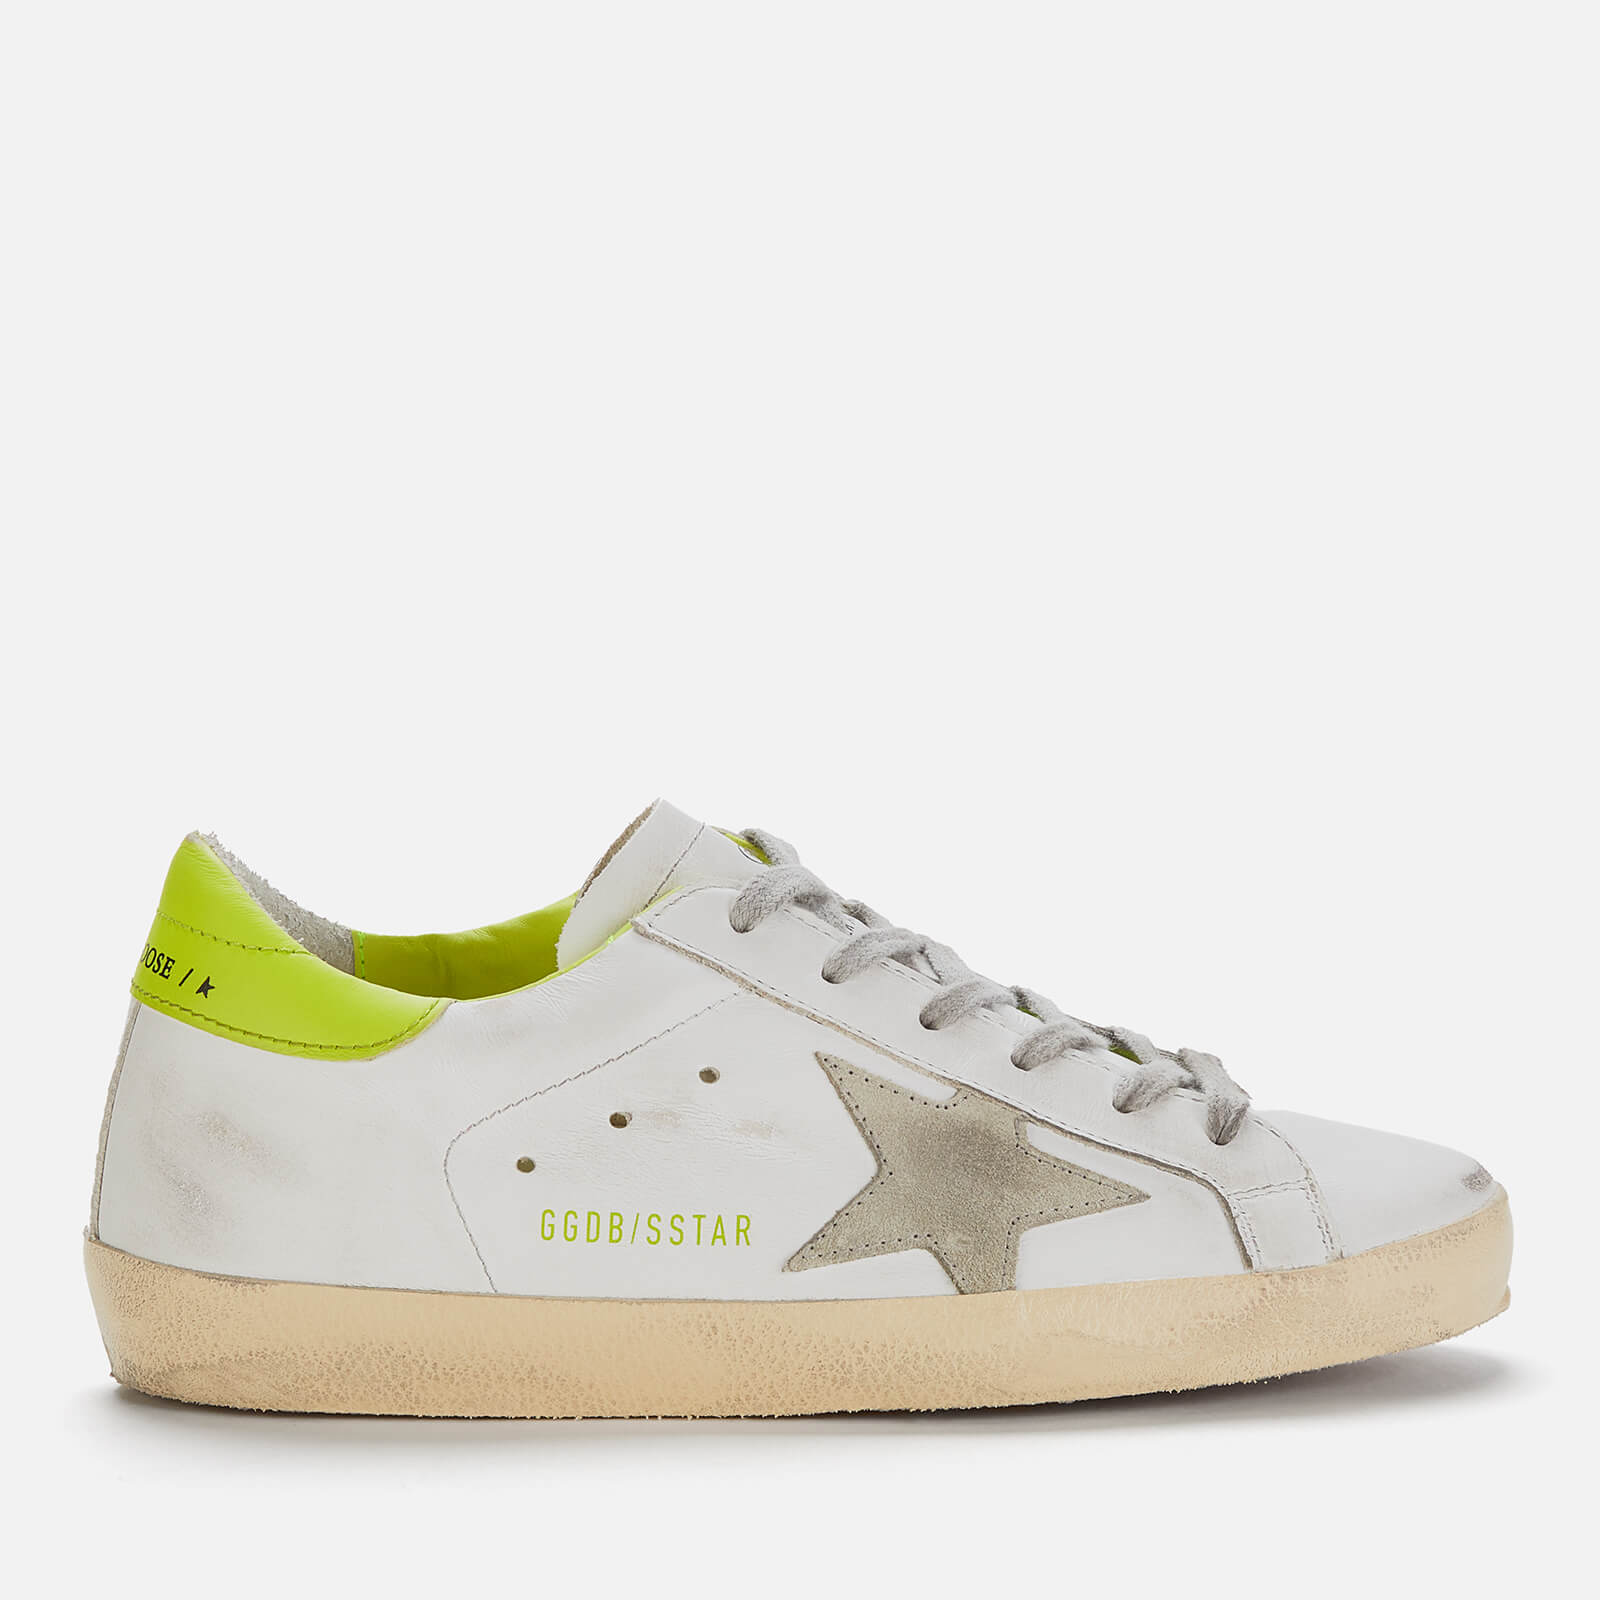 Golden Goose Deluxe Brand Women's Superstar Leather Trainers - White/Ice/Lime Green - UK 3